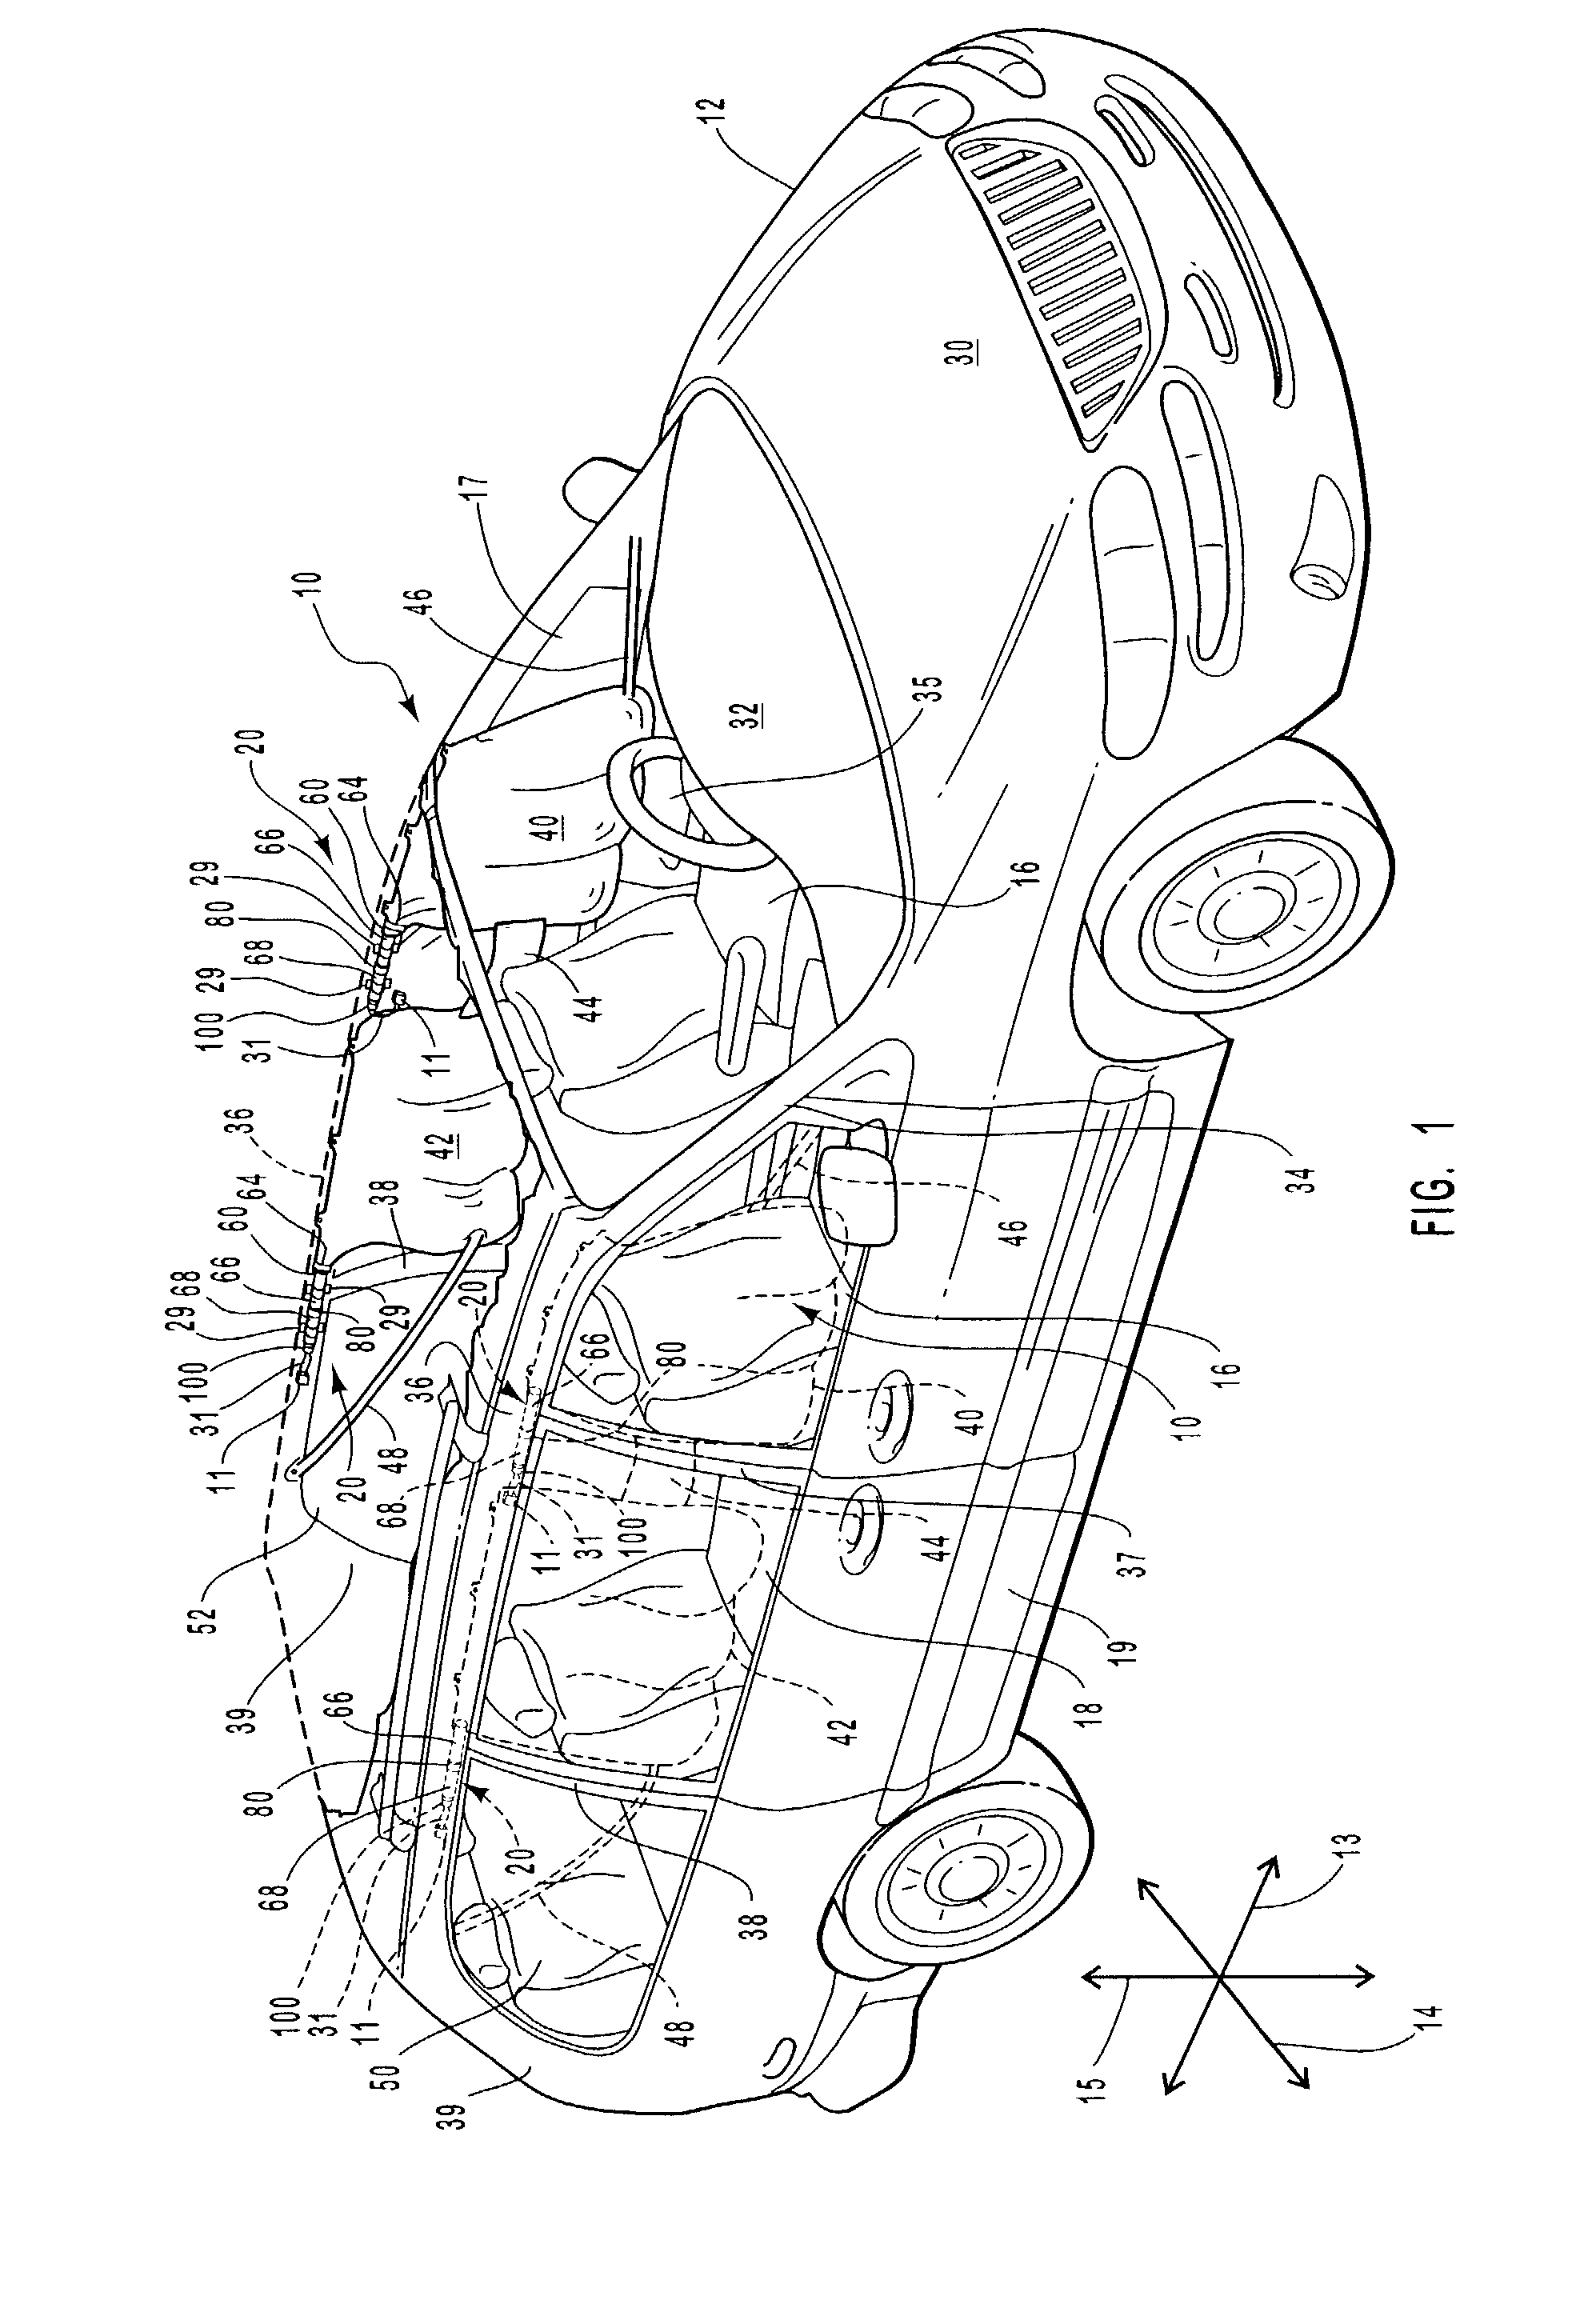 Dual stage inflator with extended gas delivery for a vehicular airbag system